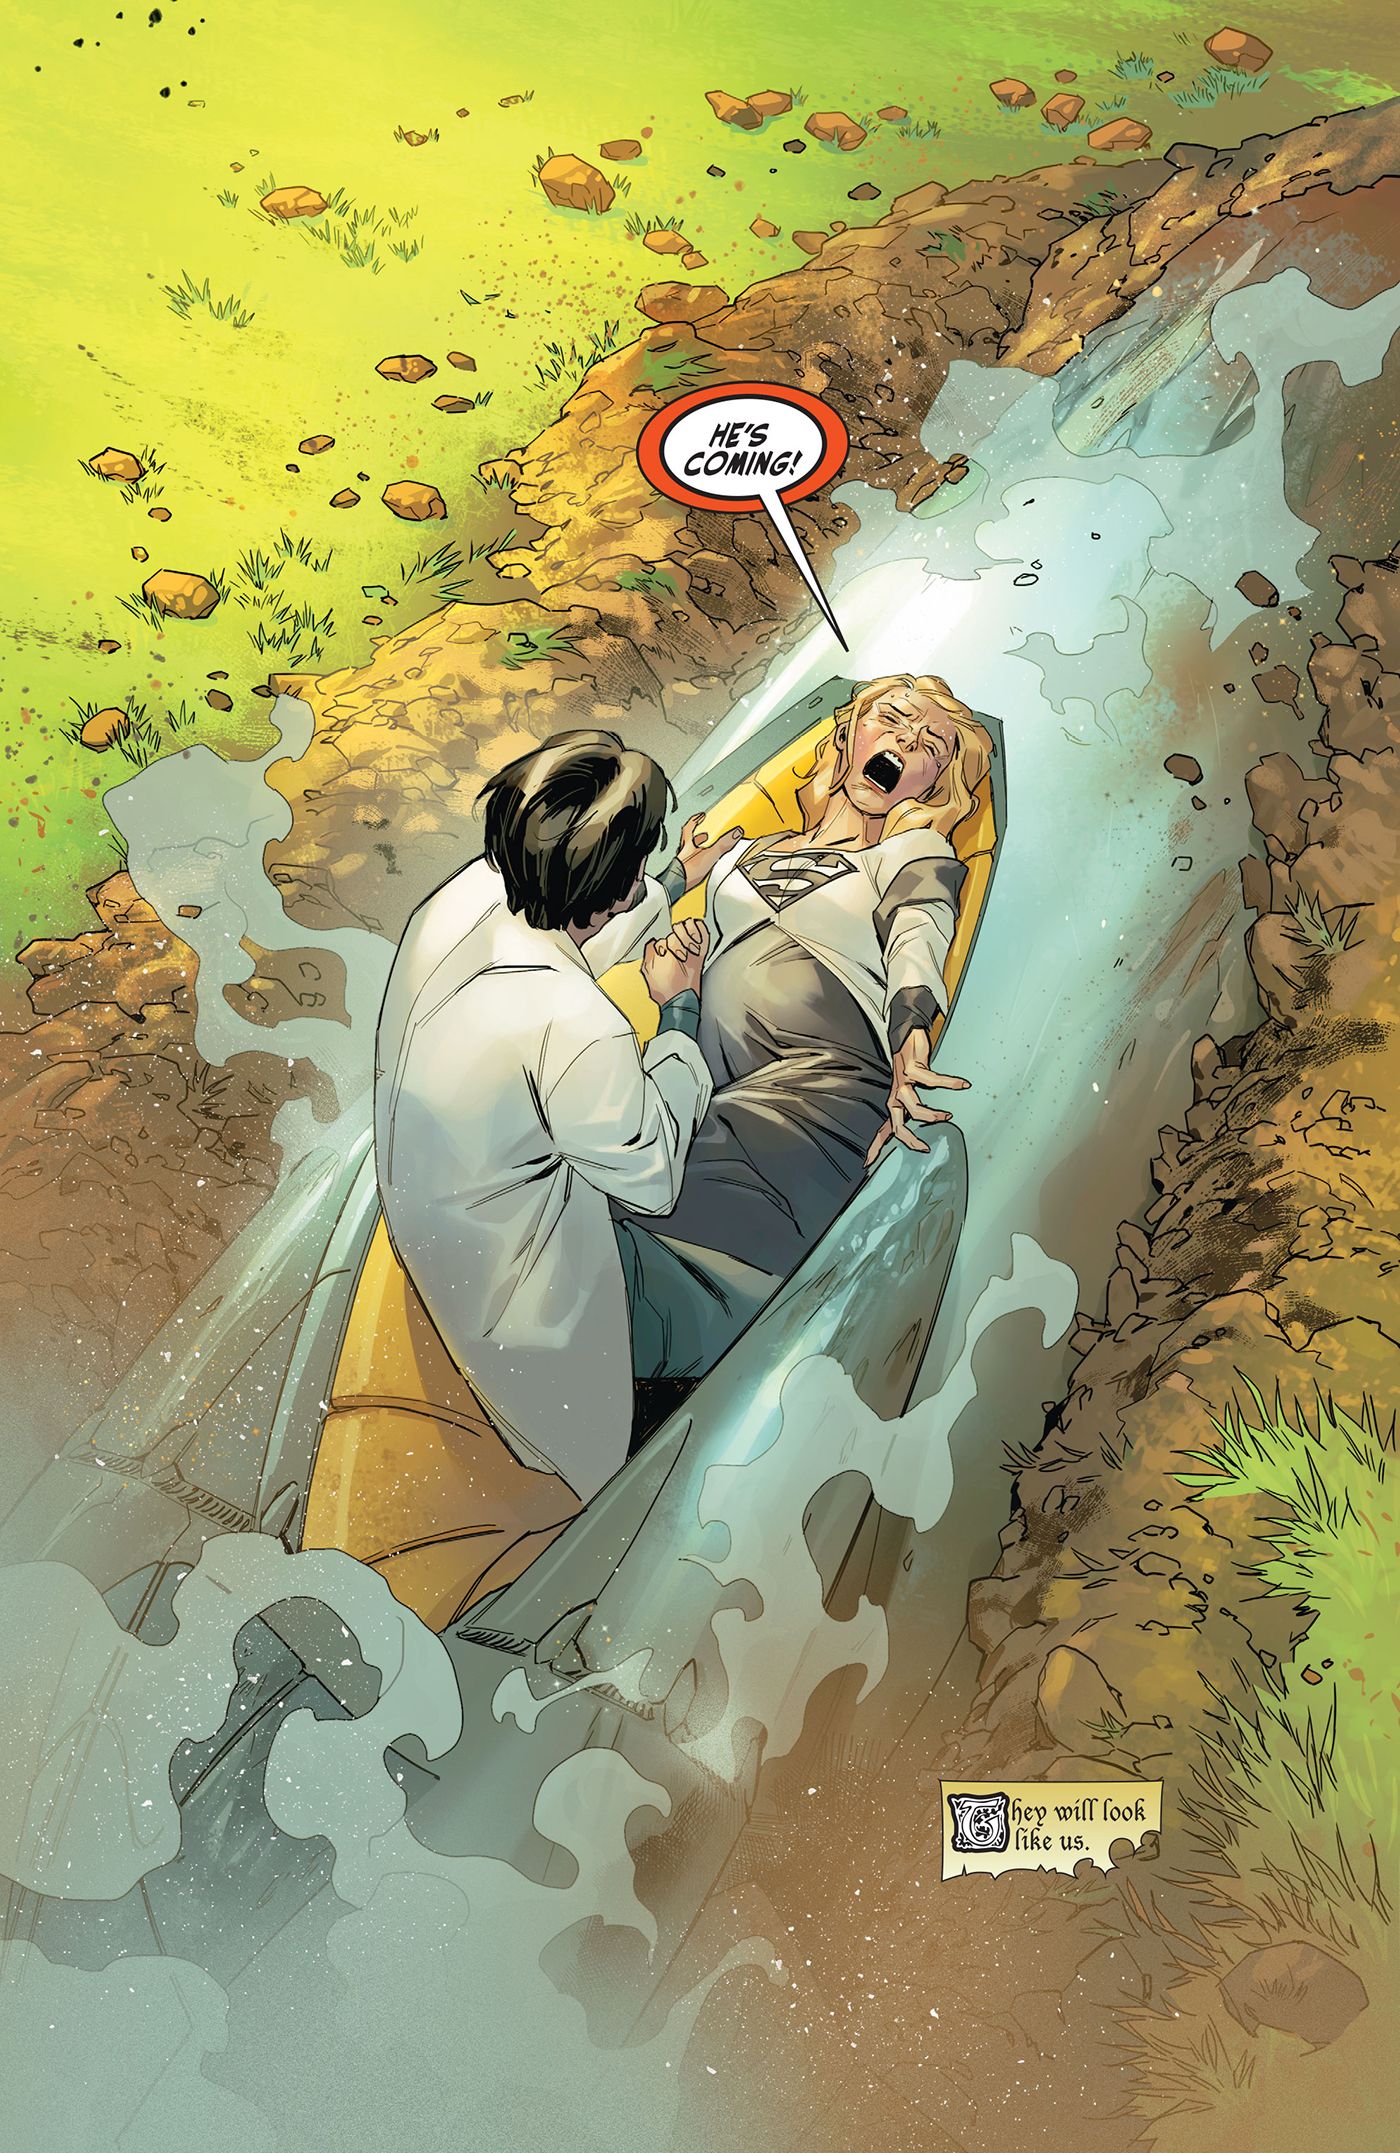 Jor-El and Lara are revealed to have taken the rocket, with Lara about to deliver their baby.